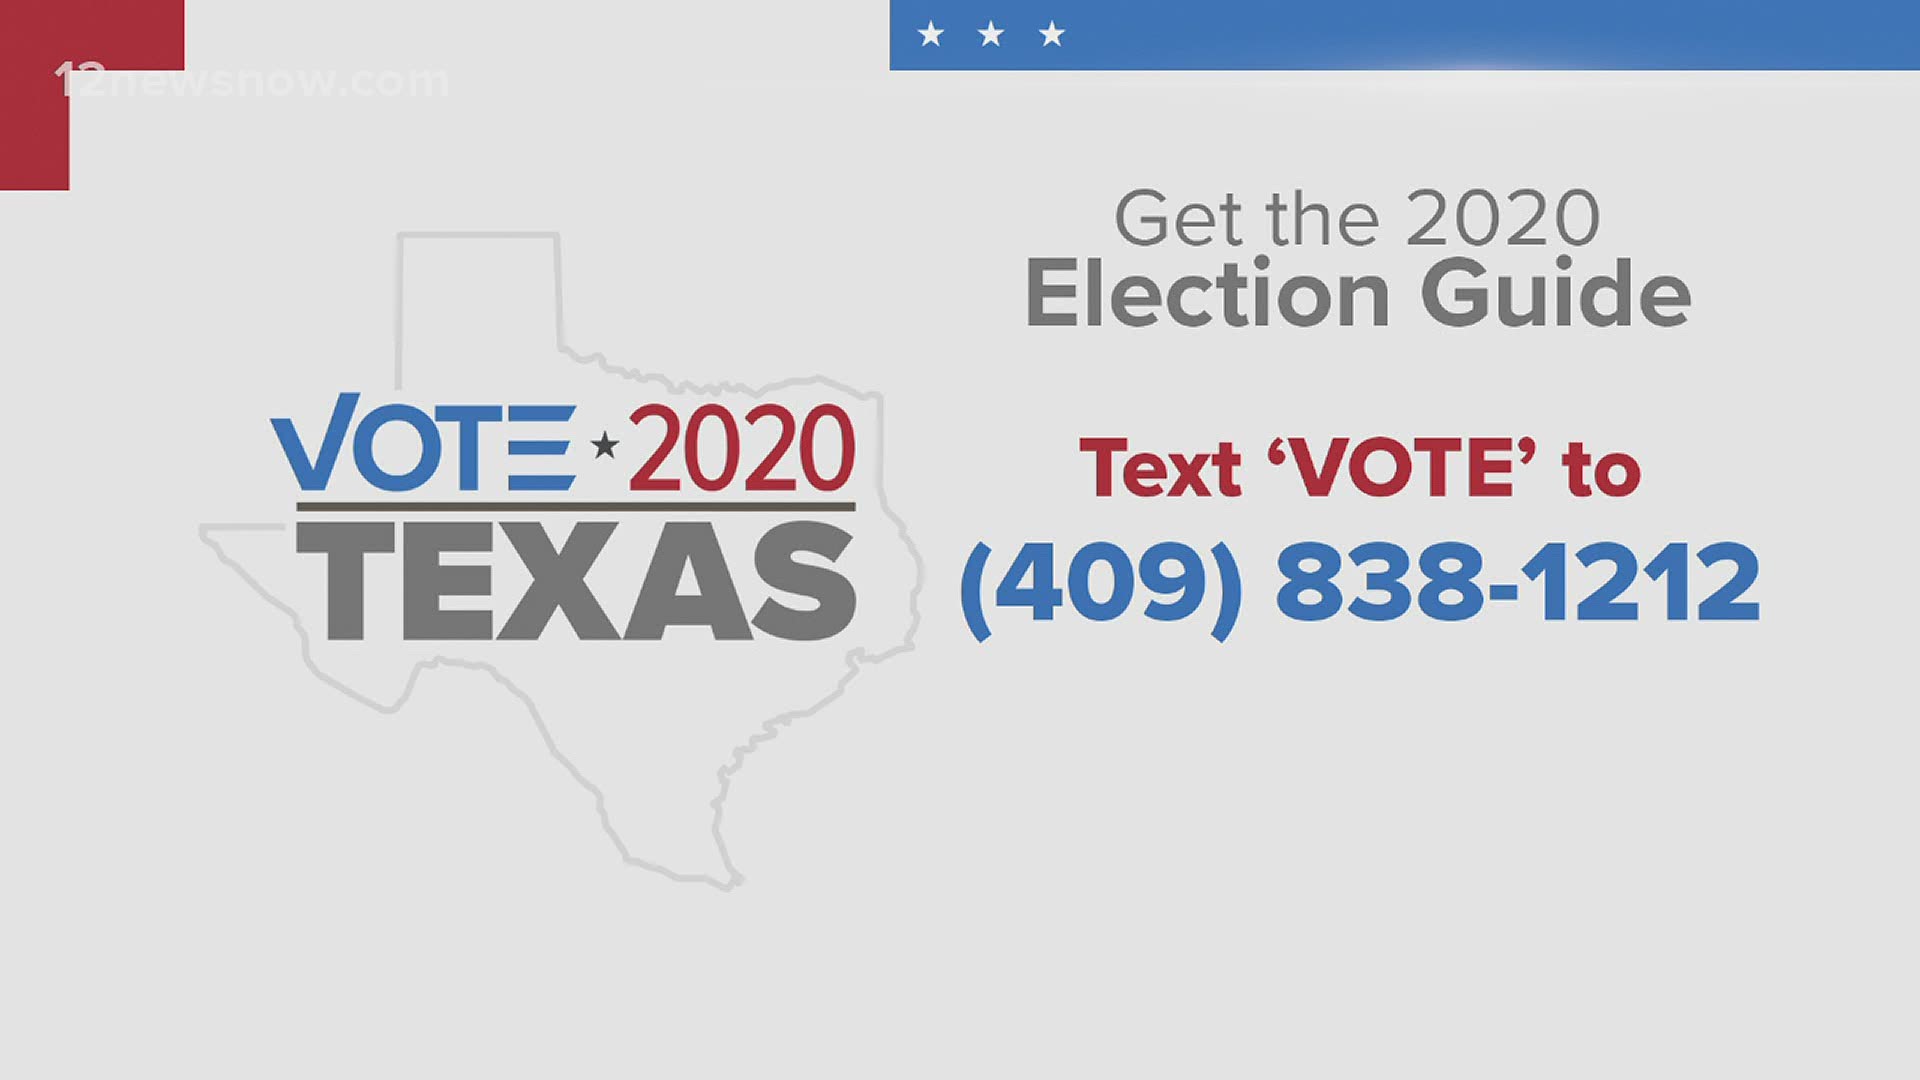 Early voting runs from Oct. 13 - Oct. 30 in Texas.